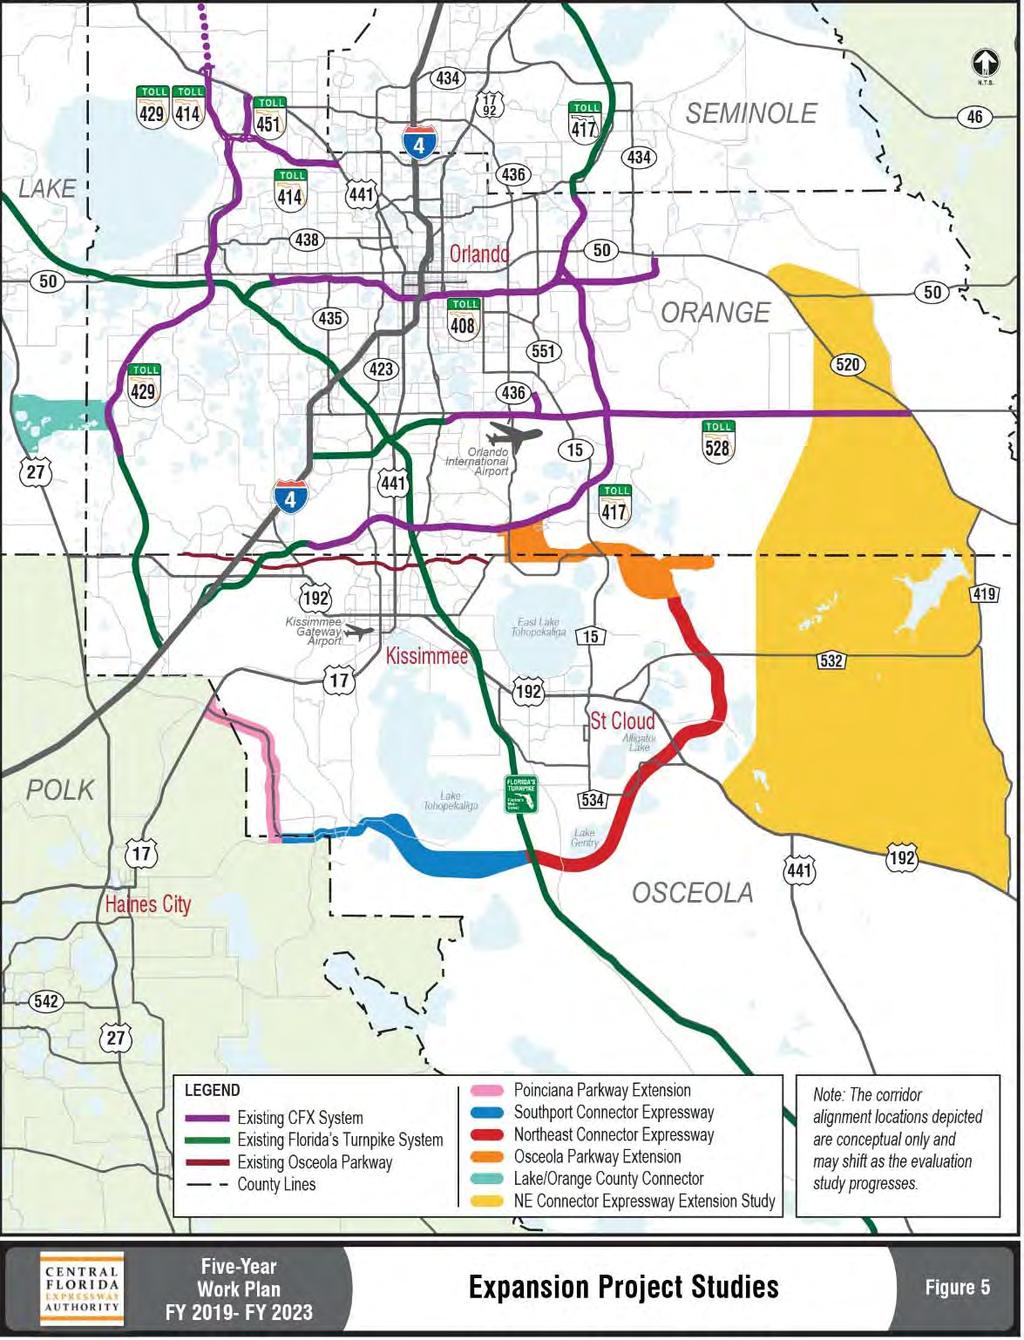 Future widenings also included in the Work Plan are: SR 417 from Boggy Creek Road to Narcoossee Road SR 528 from SR 417 to Innovation Way This category also includes systemwide miscellaneous safety